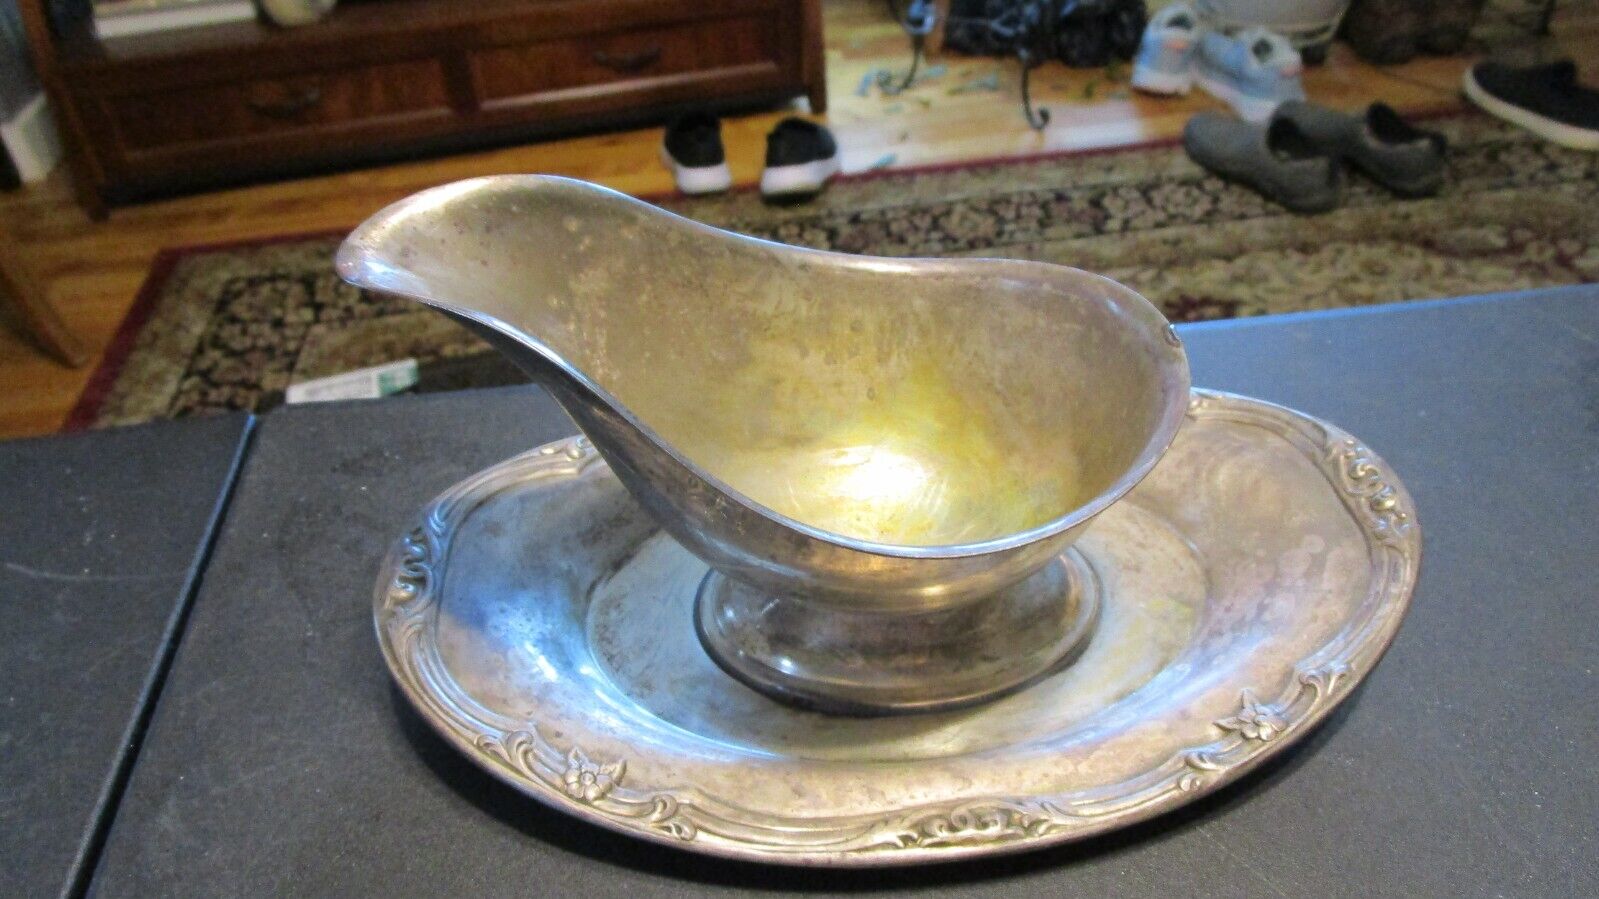 Vintage Silverplate Gravy/Sauce Boat with Attached Plate/Tray. Watson WP 130